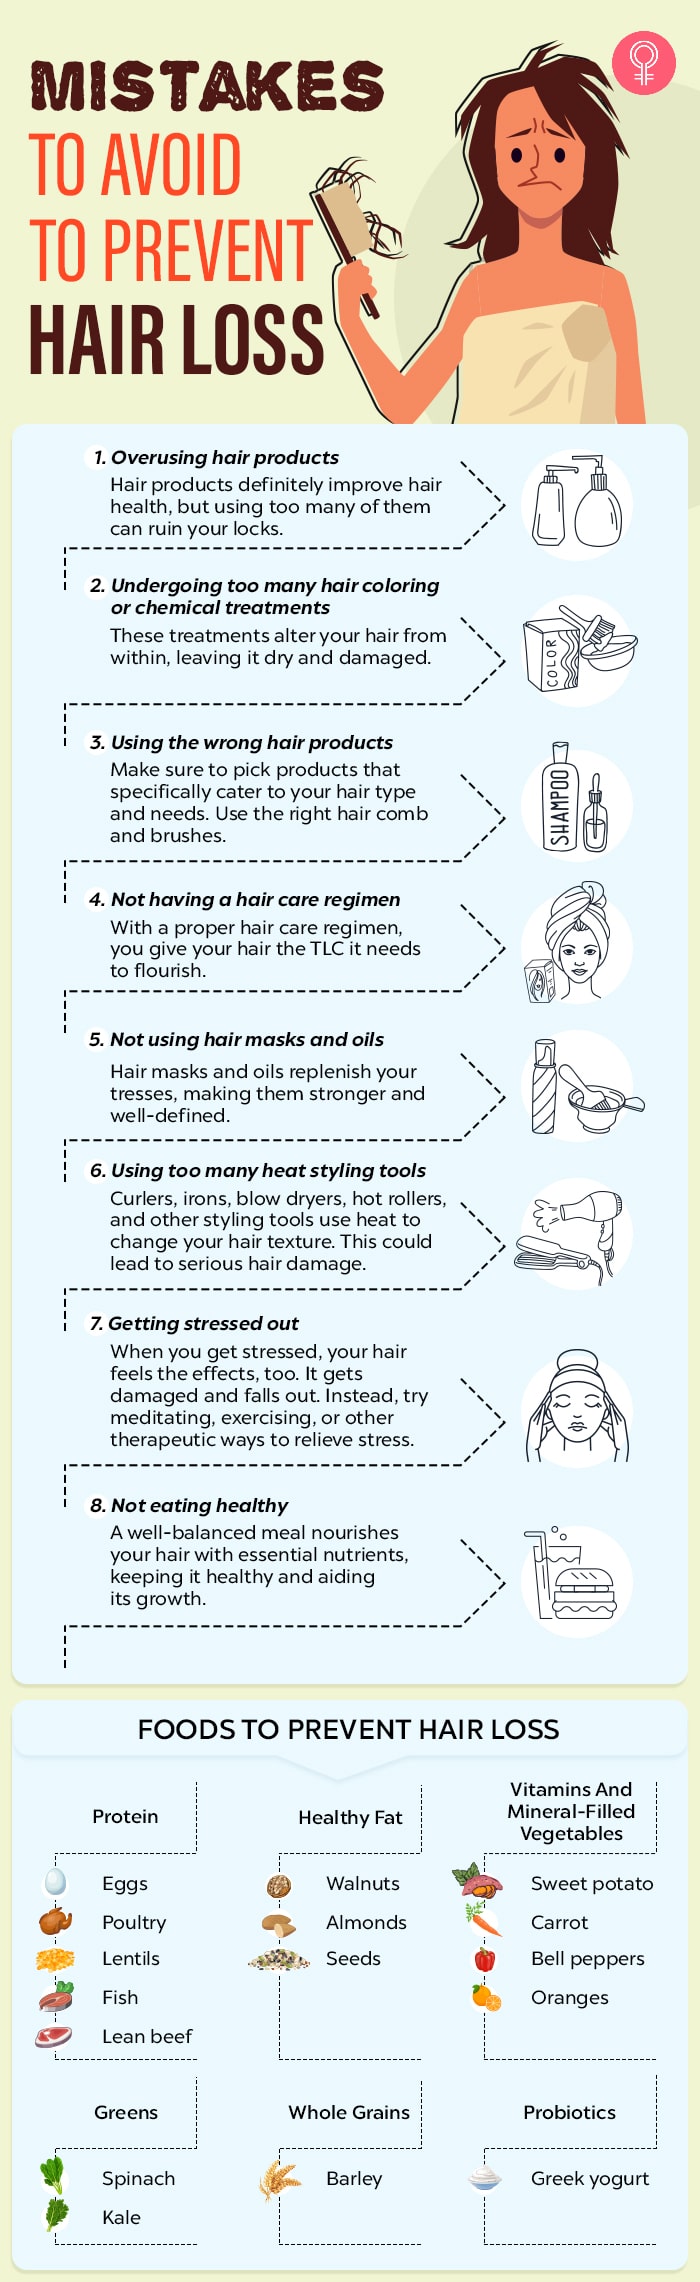 8 mistakes to avoid to prevent hair loss [infographic]